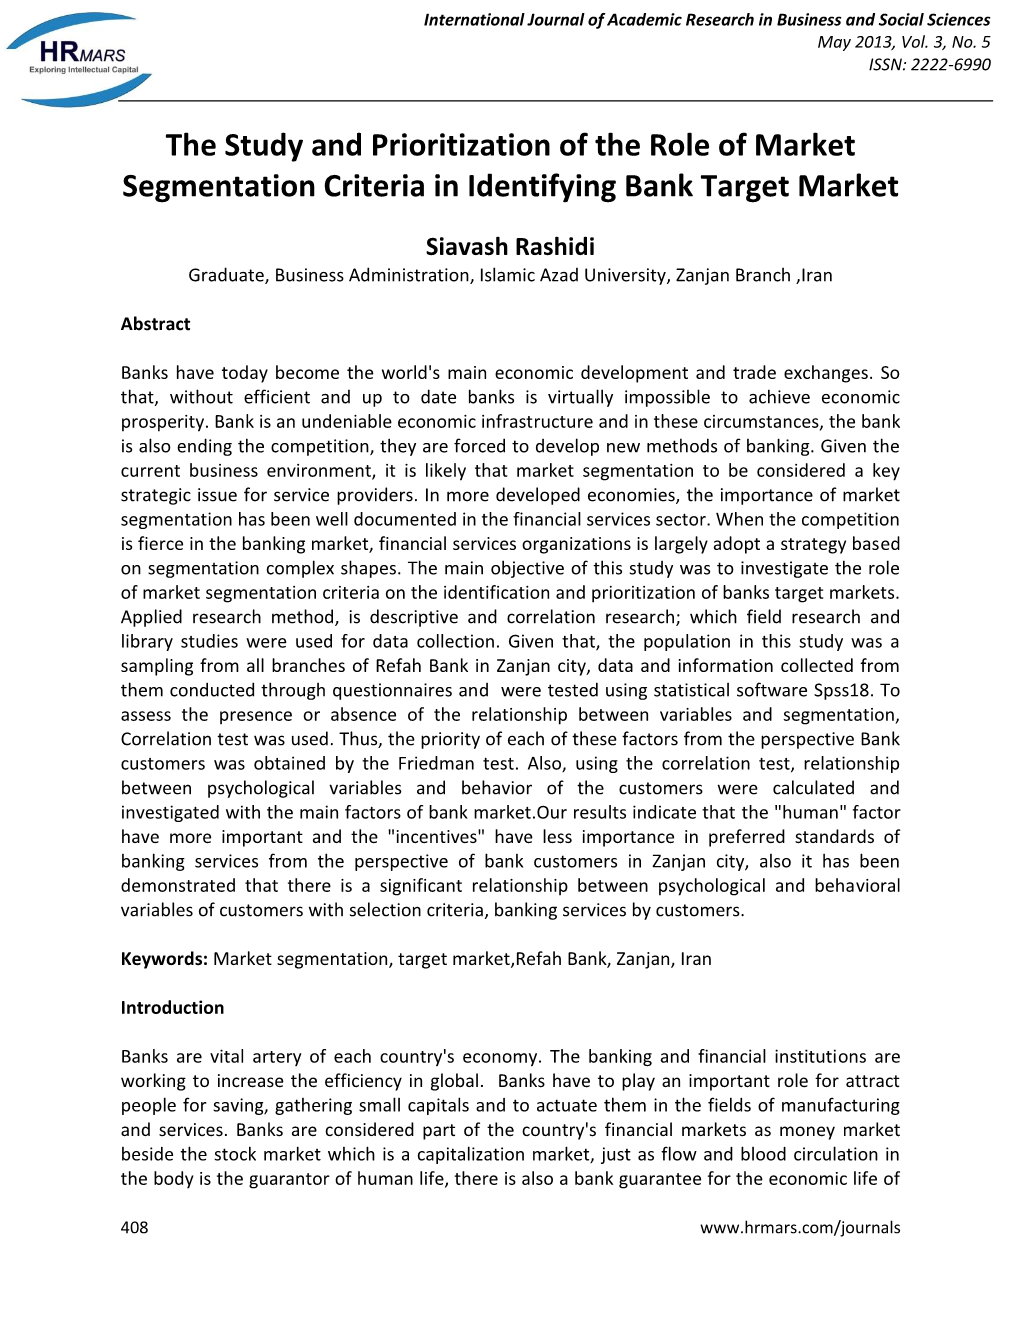 The Study and Prioritization of the Role of Market Segmentation Criteria in Identifying Bank Target Market